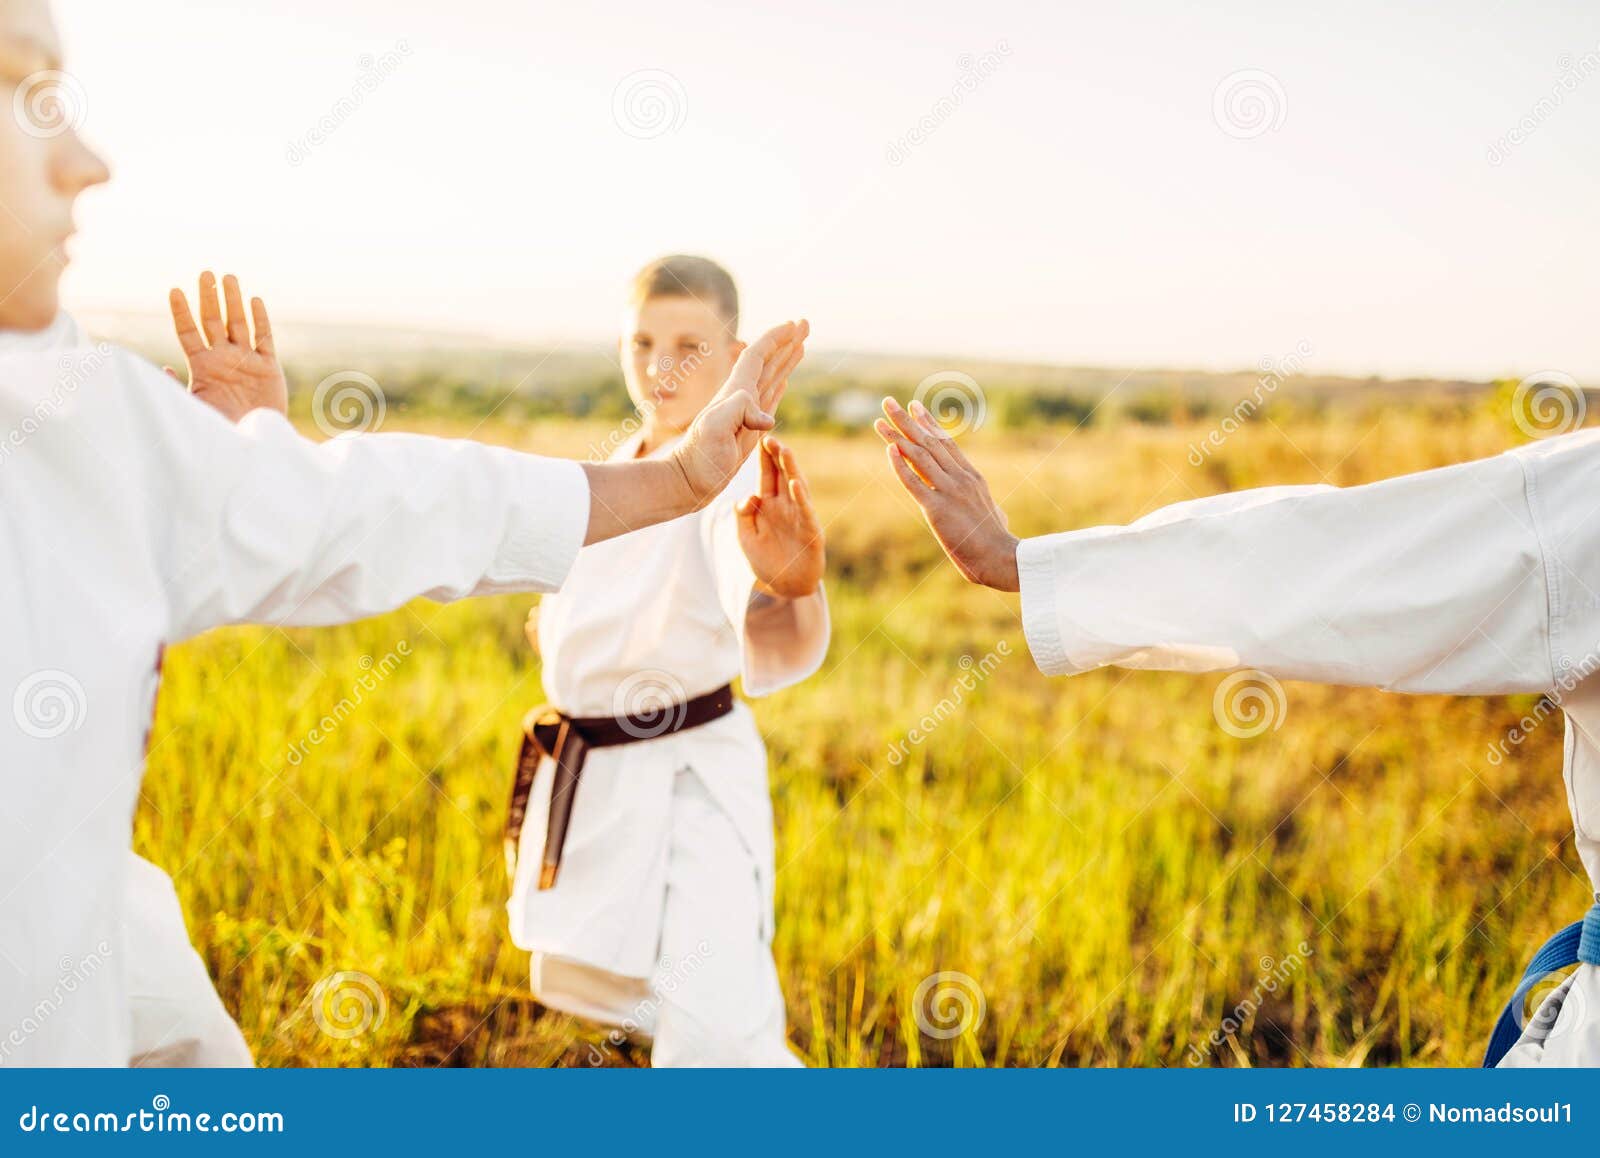 Junior Karate Team with Instructor on Training Stock Photo - Image of